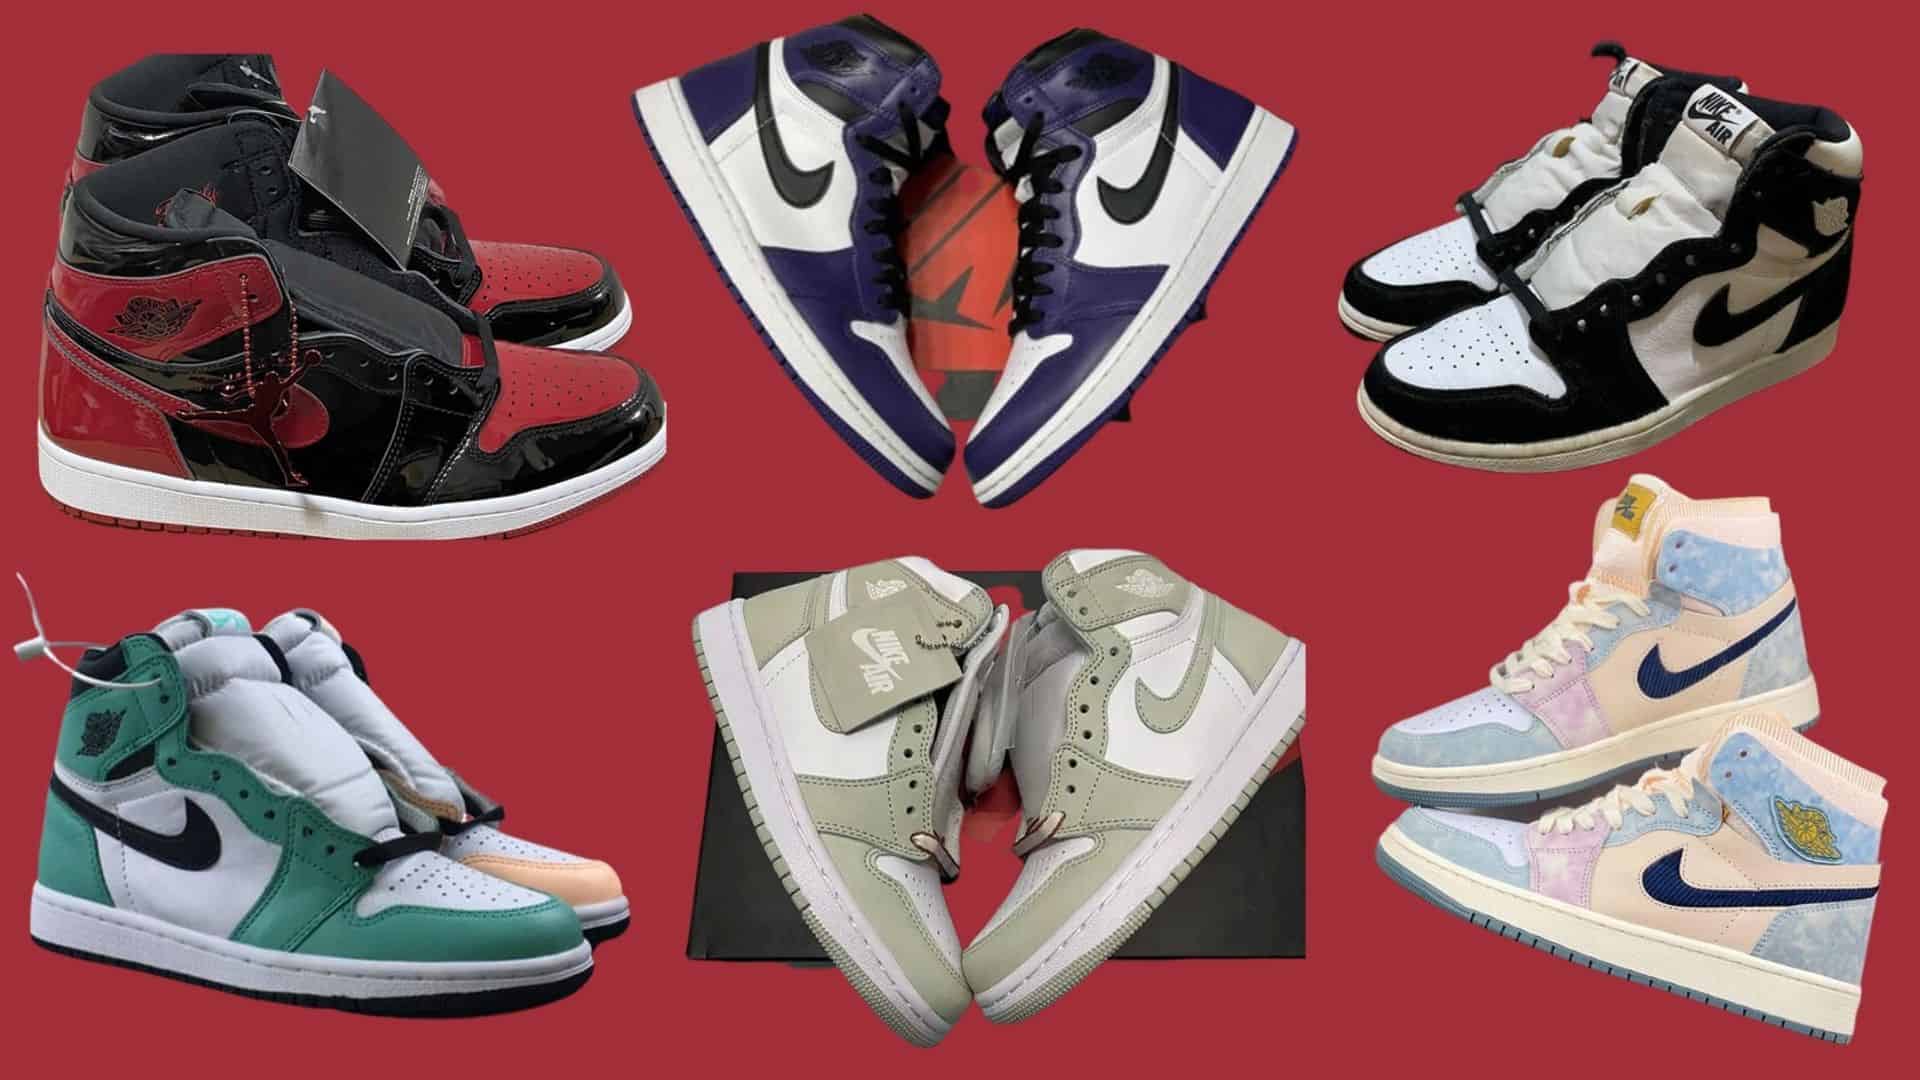 Get the Classic Look with the Best Jordan 1 Replica Sneakers on